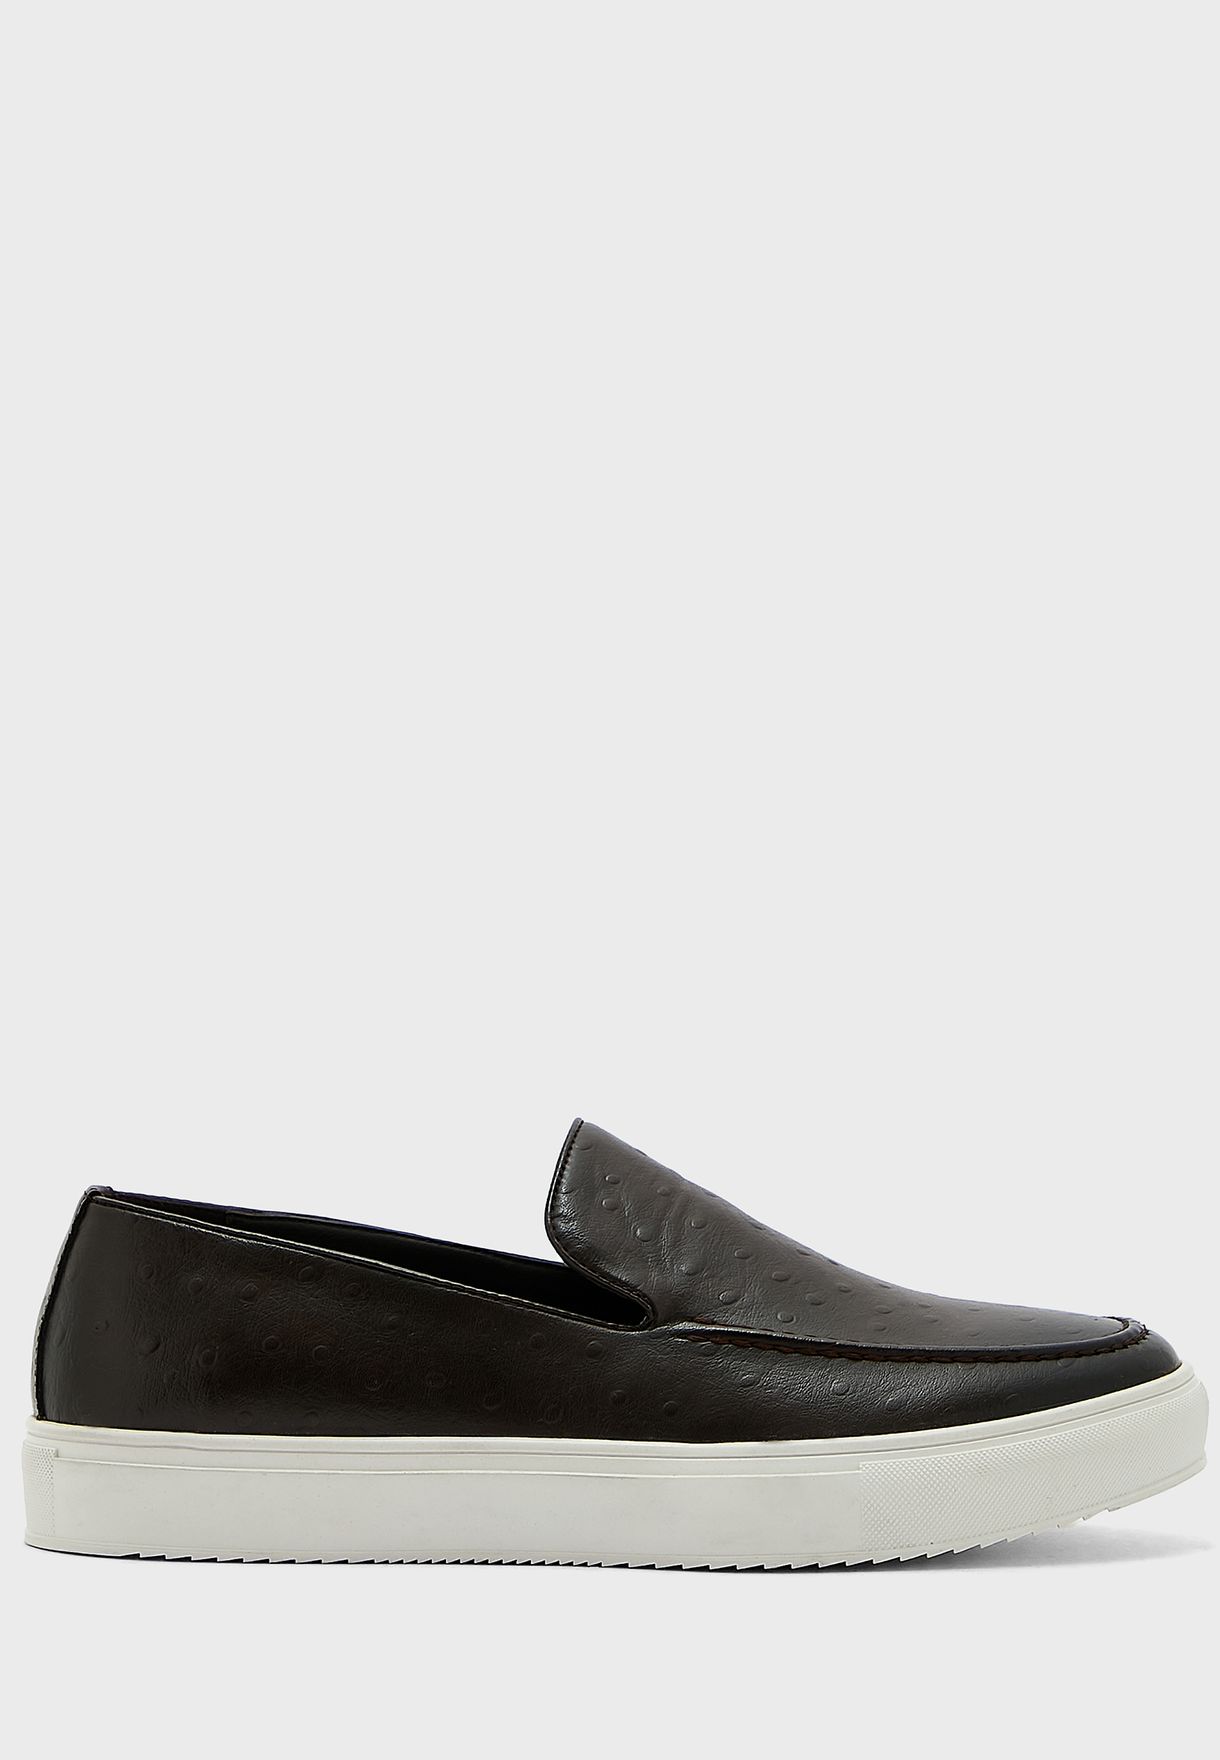 Ostrich Print Casual Slip Ons